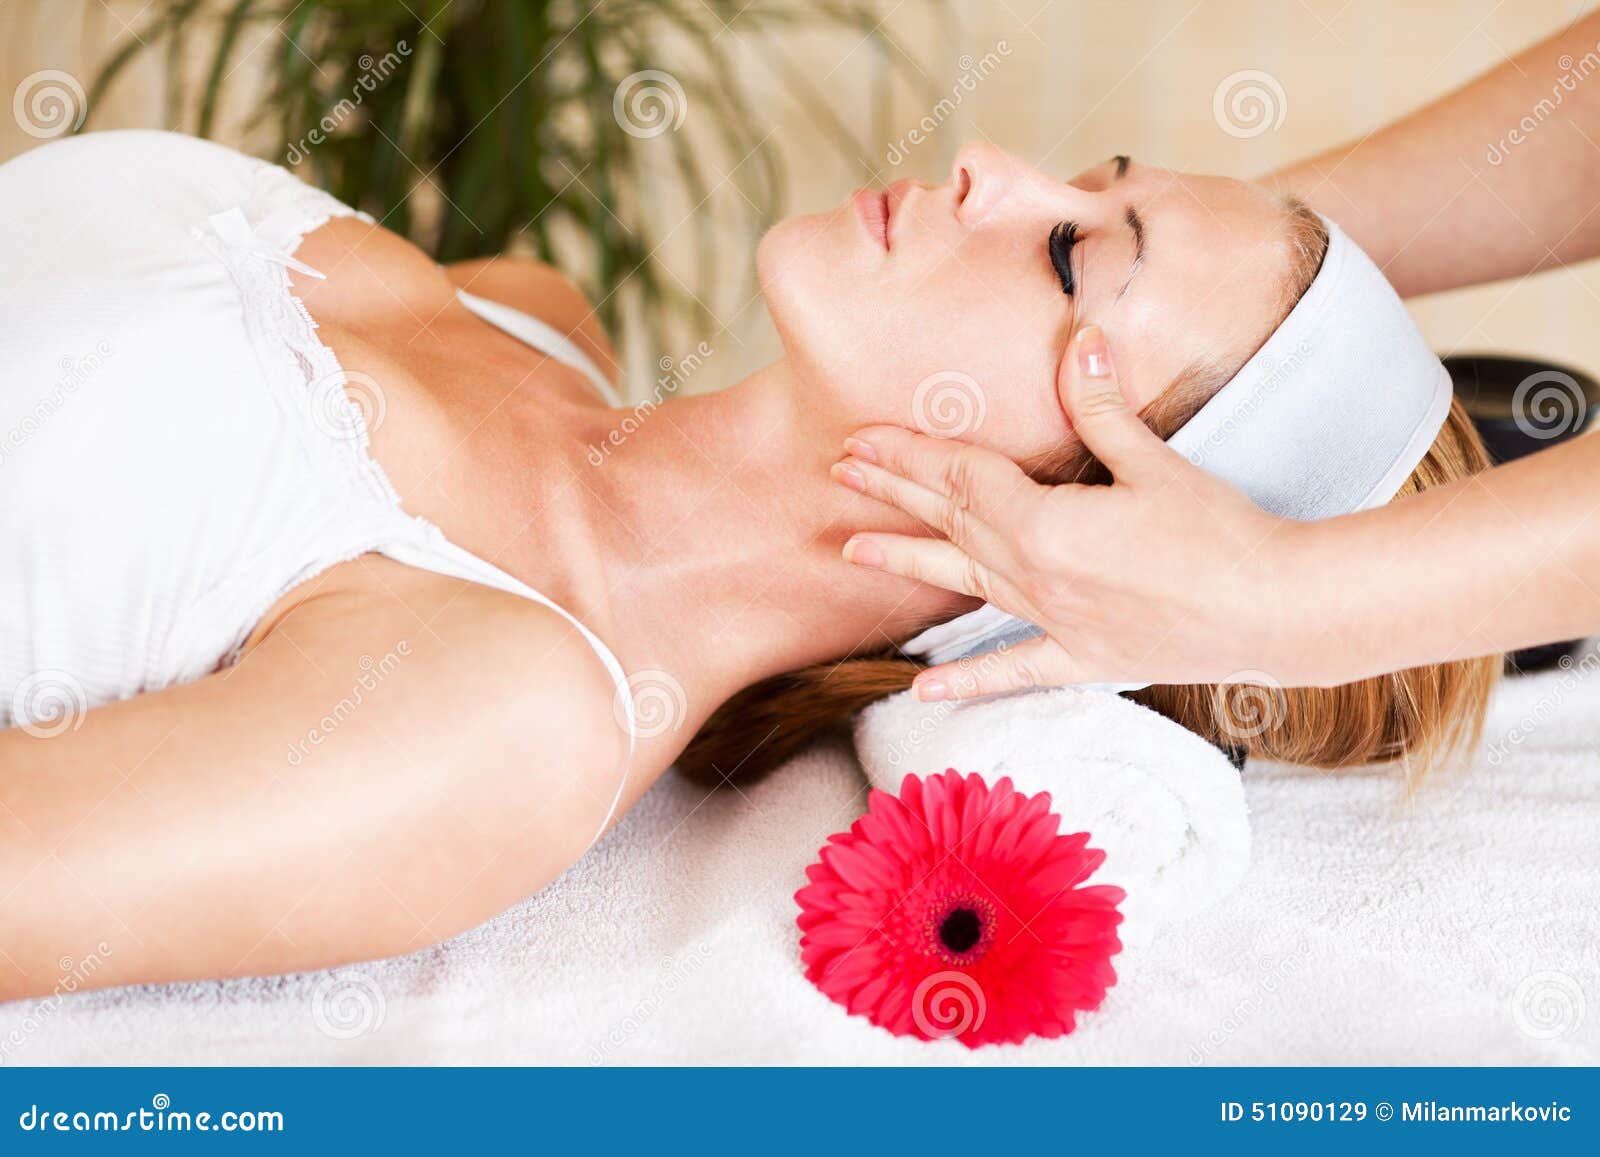 Head Massage At The Spa Center Stock Image Image Of Massage Beauty